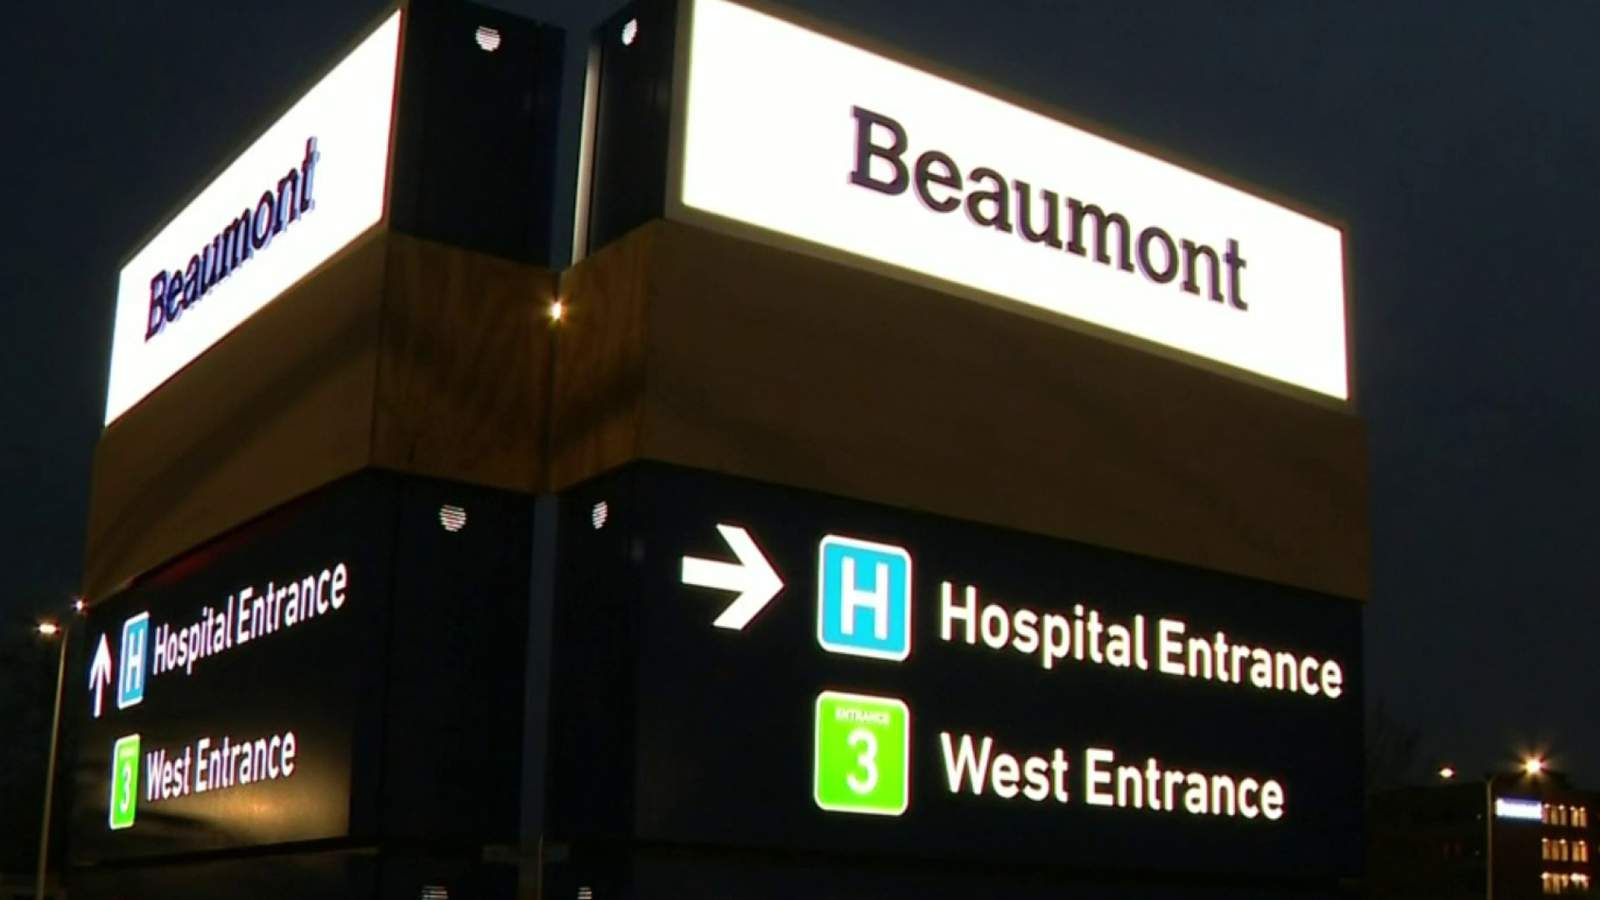 Beaumont Hospital in Farmington Hills won’t allow visitors due to rise in COVID-19 case